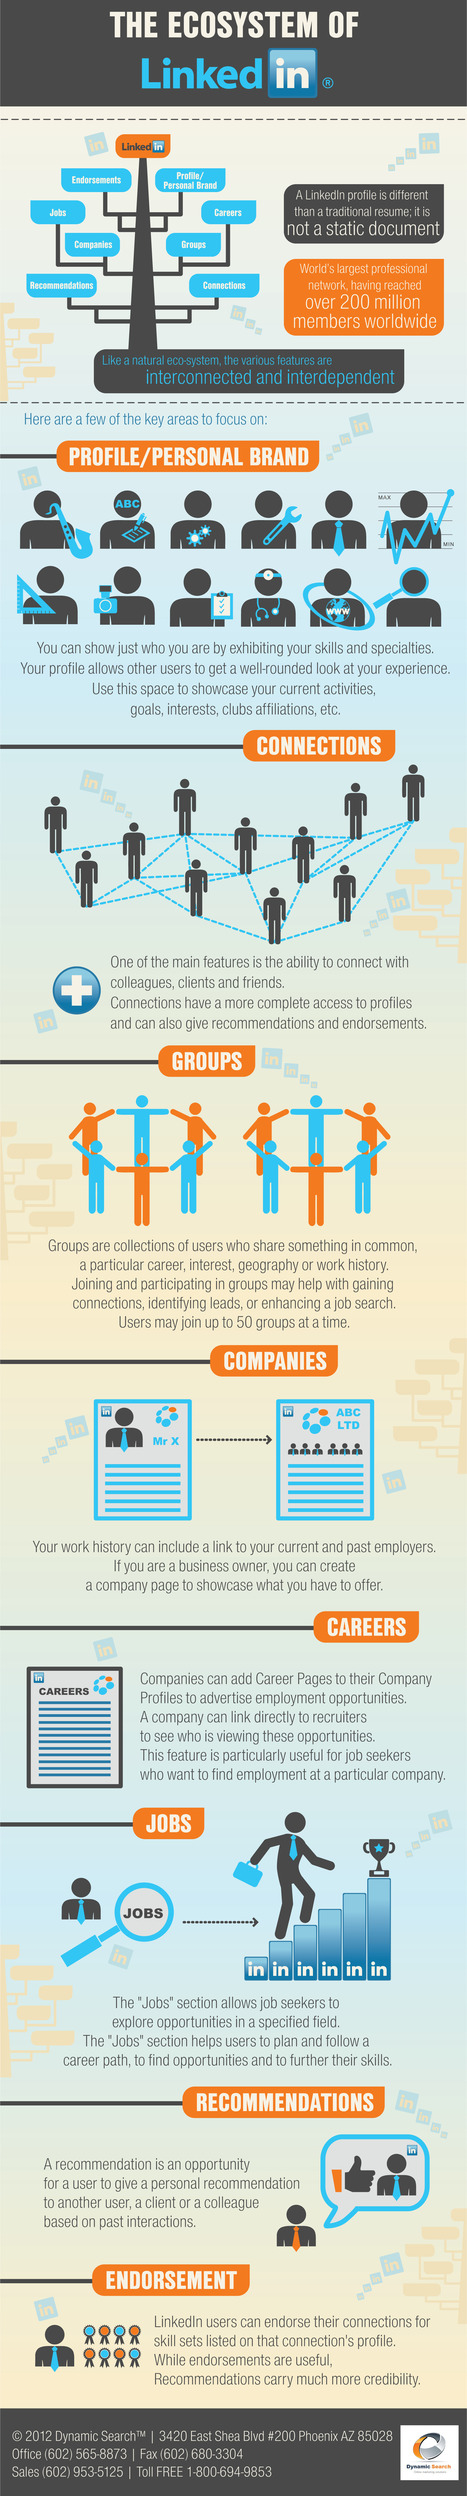 The Ecosystem of LinkedIn | Visual.ly | Information Technology & Social Media News | Scoop.it